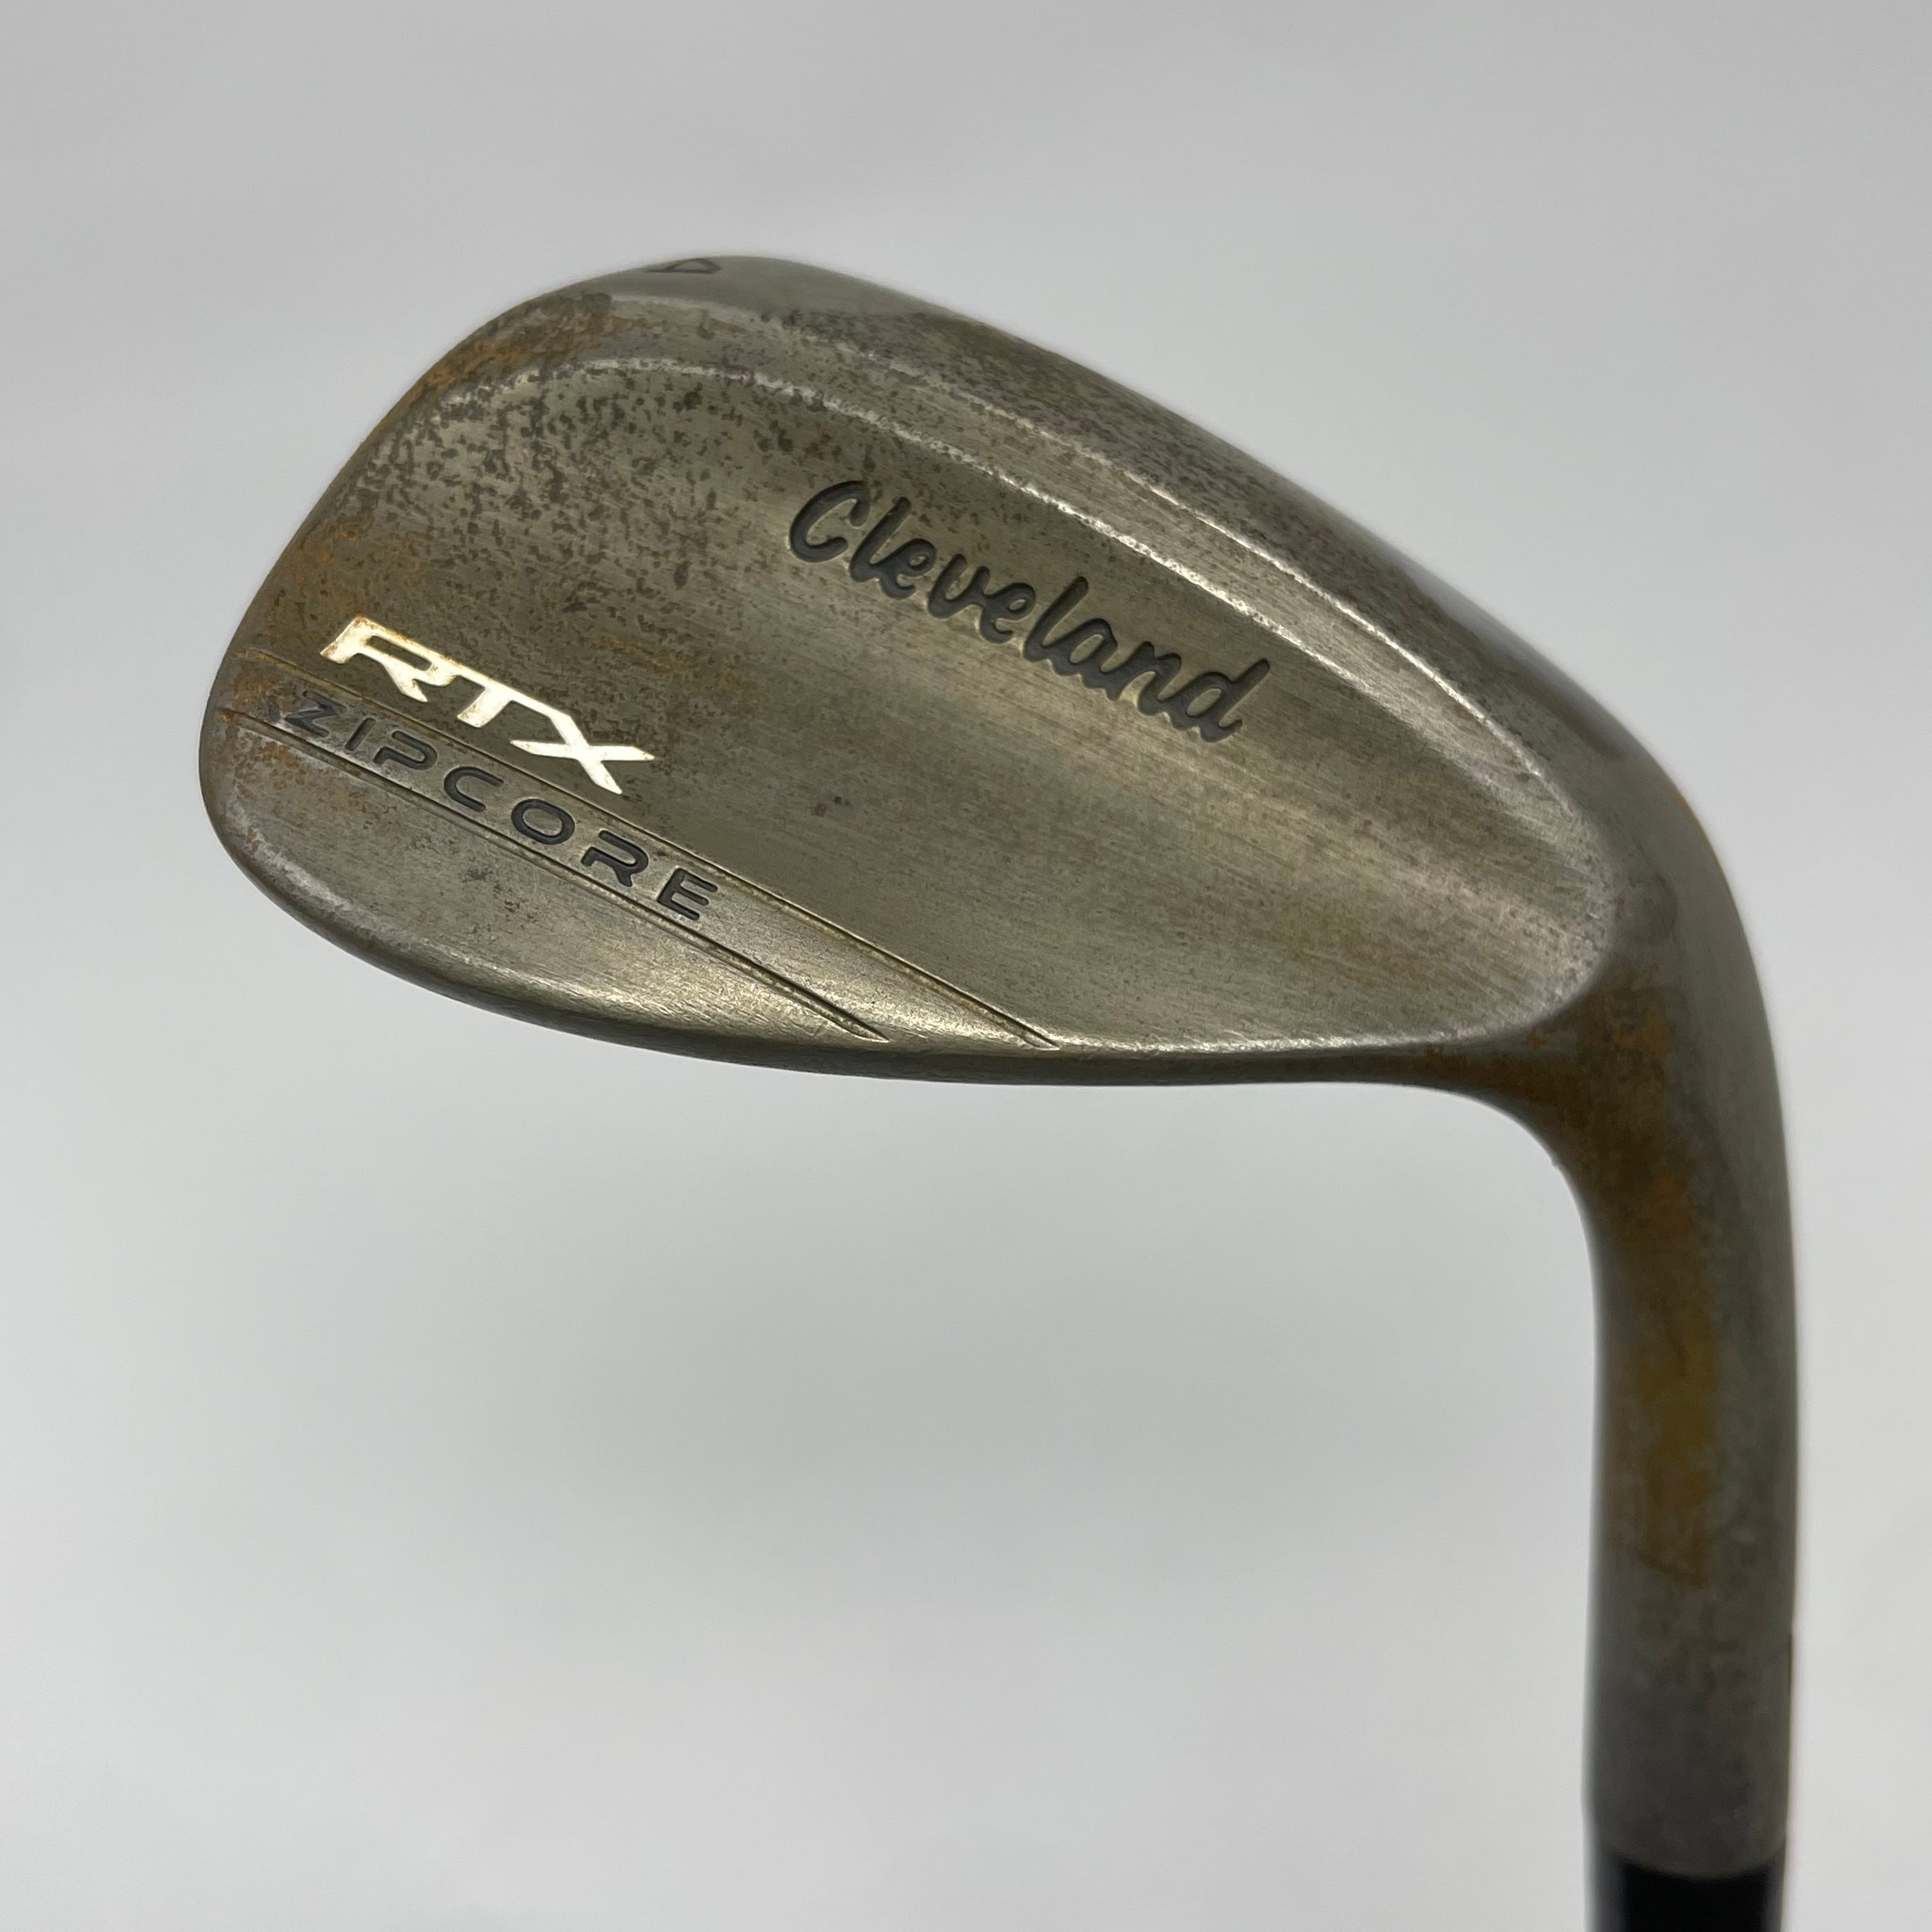 CLEVELAND TOUR ISSUE RAW RTX ZIPCORE WEDGE / 54 DEGREE 10 BOUNCE MID GRIND / NS PRO MODUS 105 X FLEX SHAFT